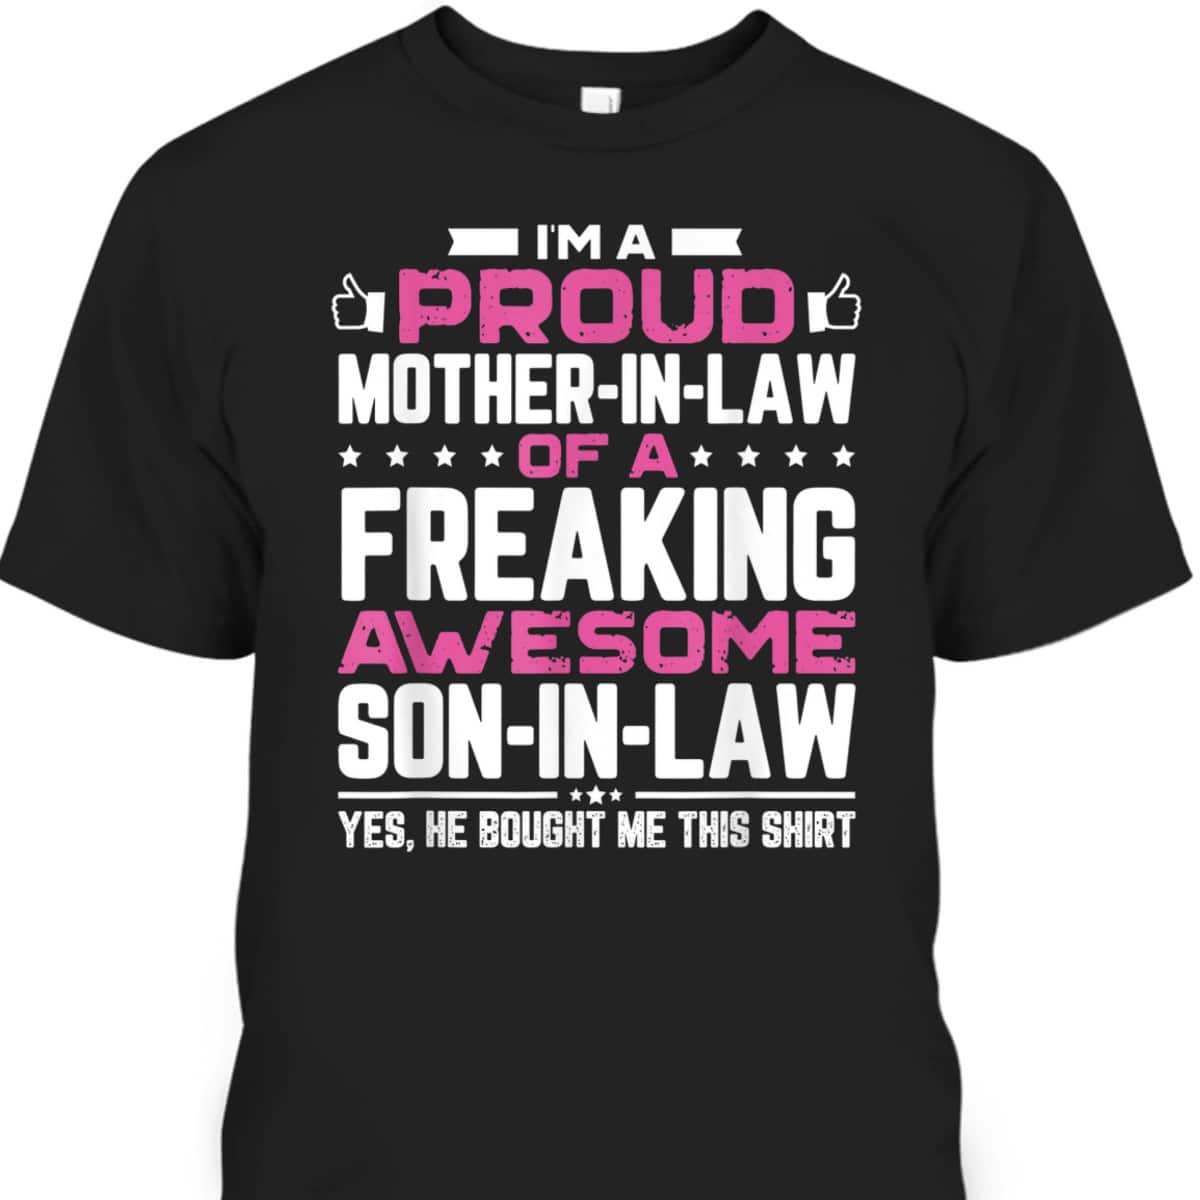 Mother's Day T-Shirt I'm A Proud Mother-In-Law Freaking Awesome Son-In-Law